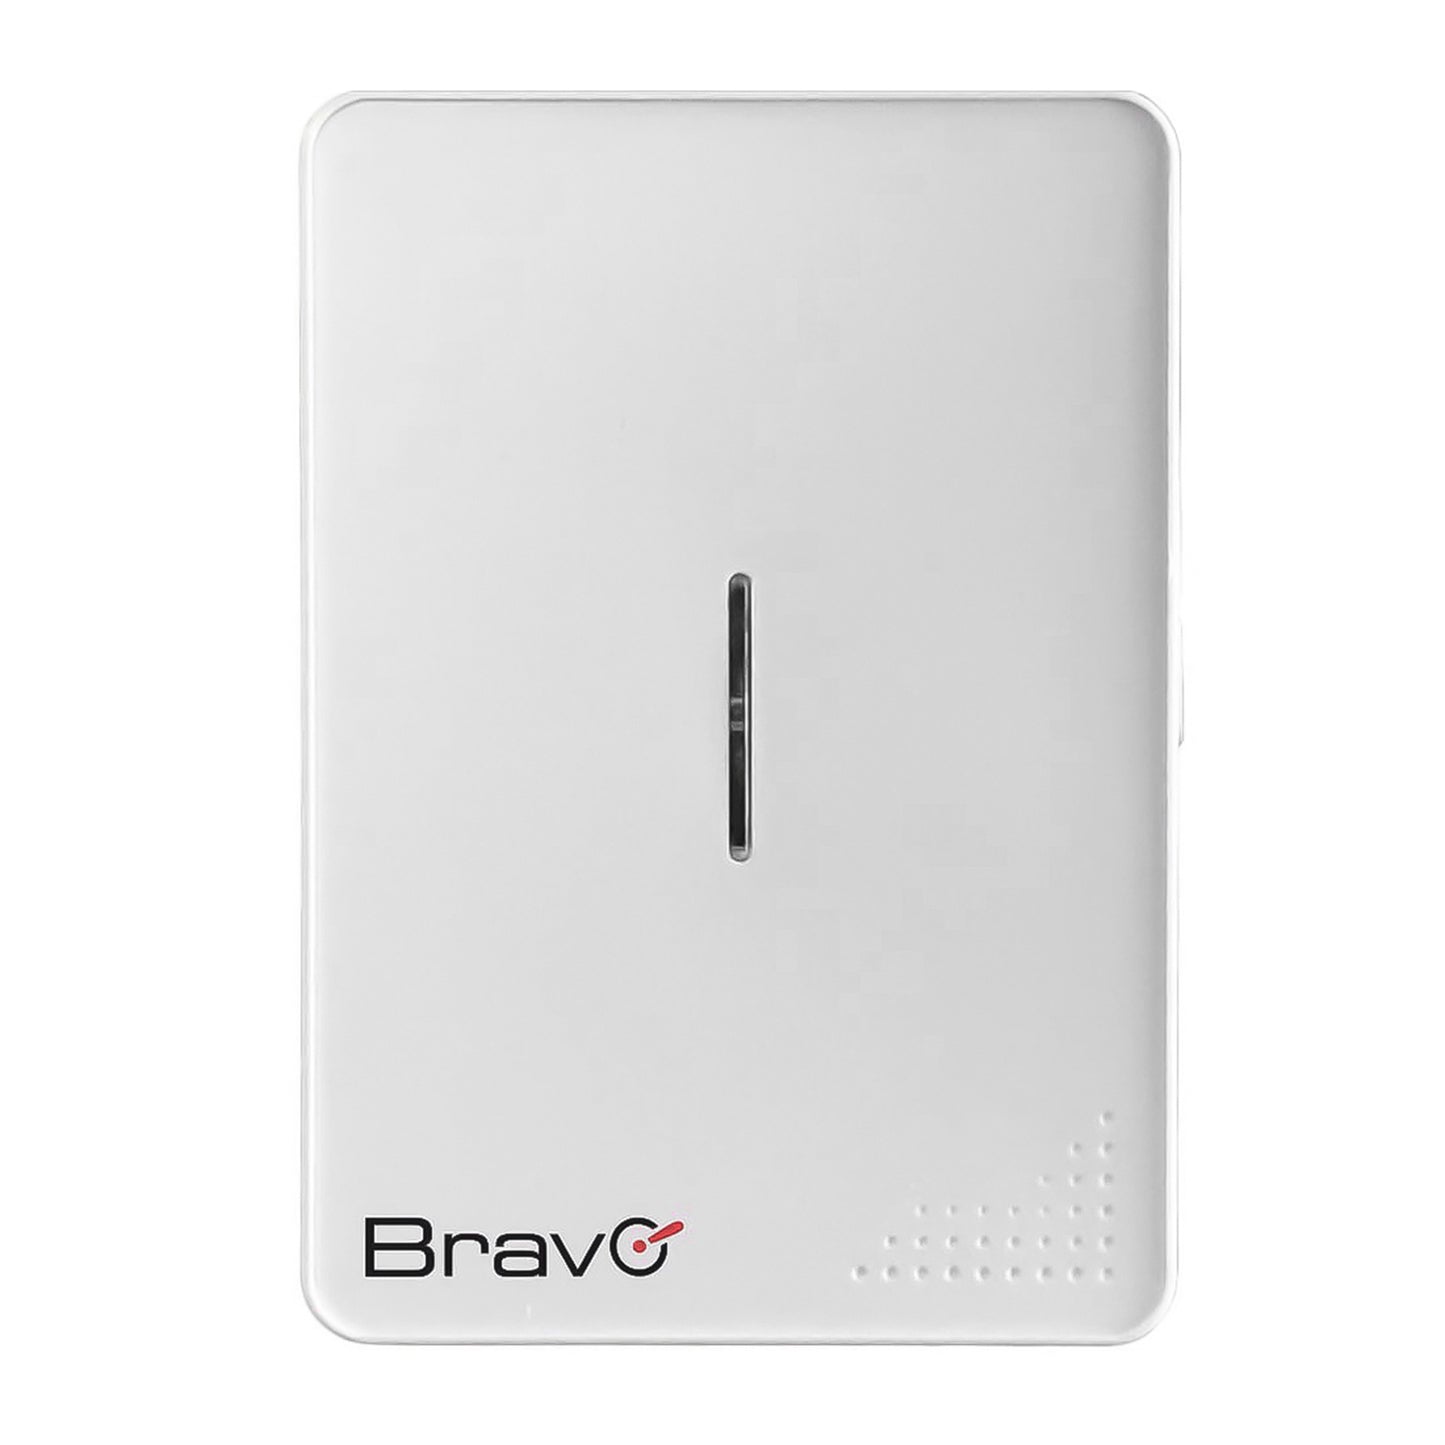 Bravo waterproof plug-in wireless doorbell, no batteries required, maximum range of 100m without obstacles, doorbell with 38 ringtones and bright LED